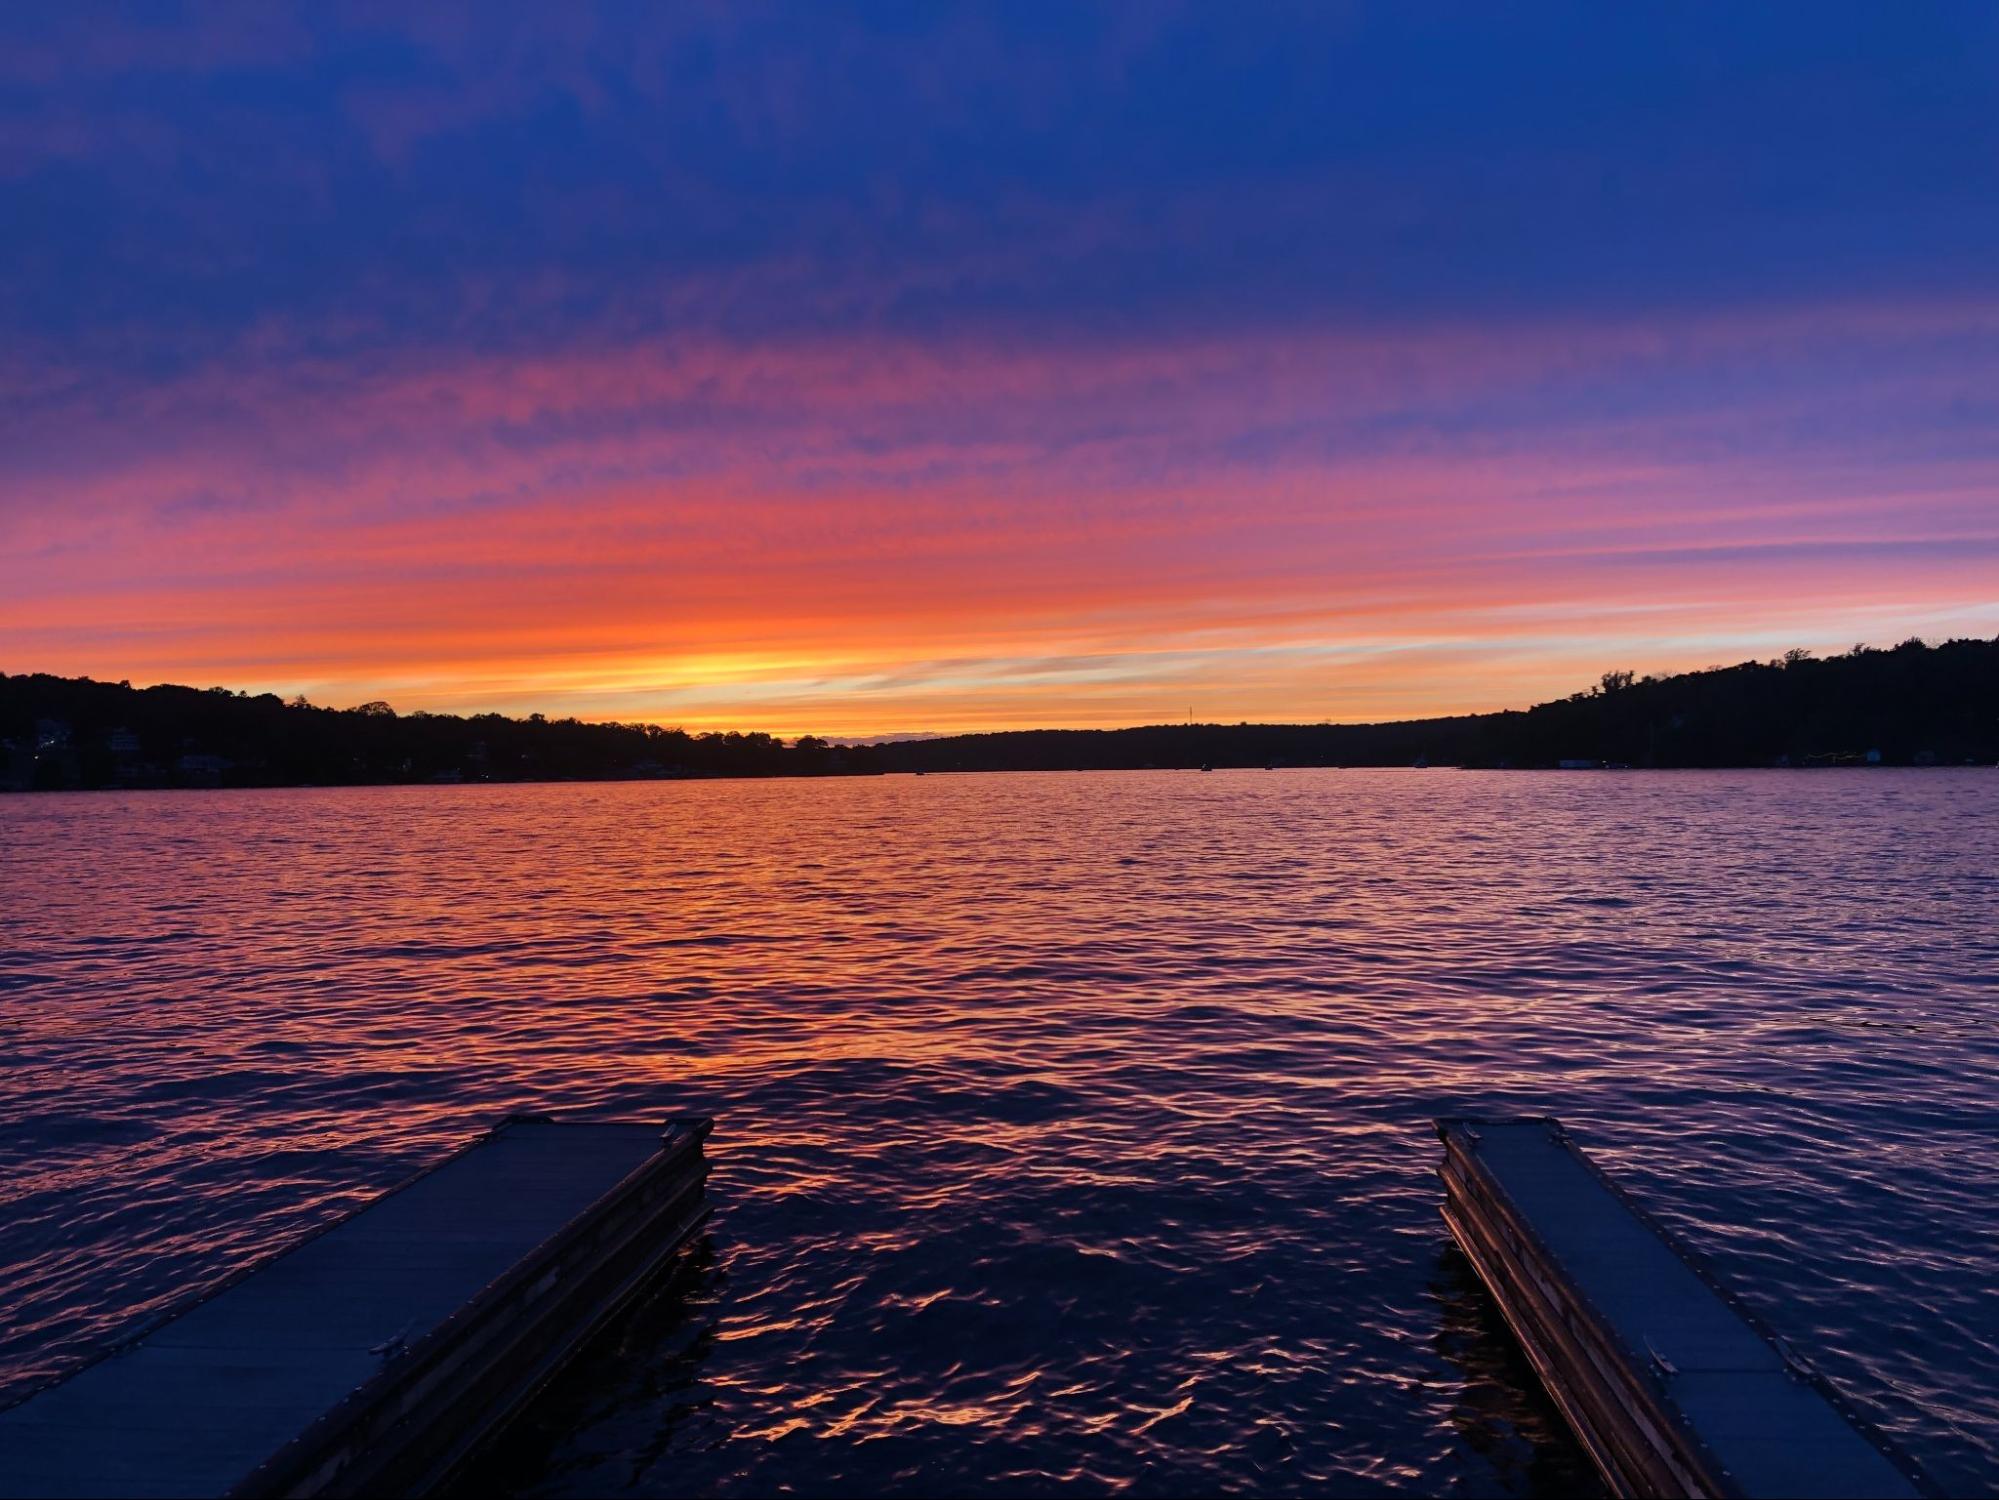 A sunset over the waters of Lake Hopatcong from the dock of The Windlass